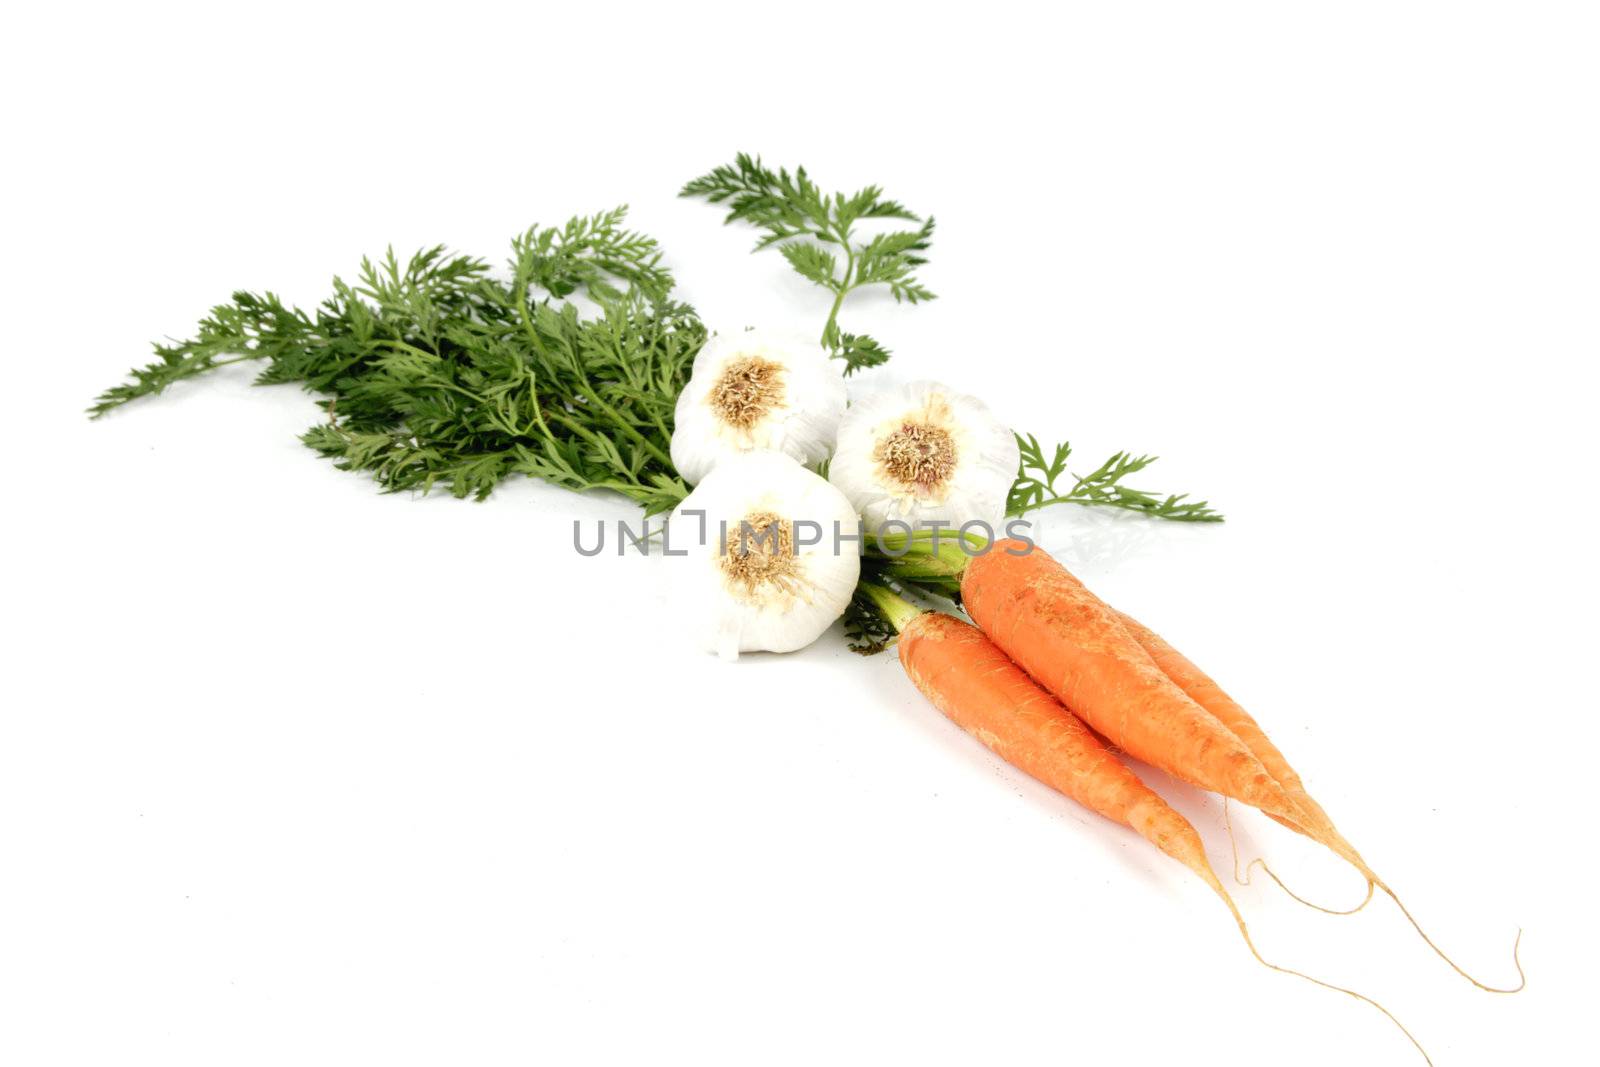 Bunch on raw crunchy carrots with white garlic bulbs on a reflective white background